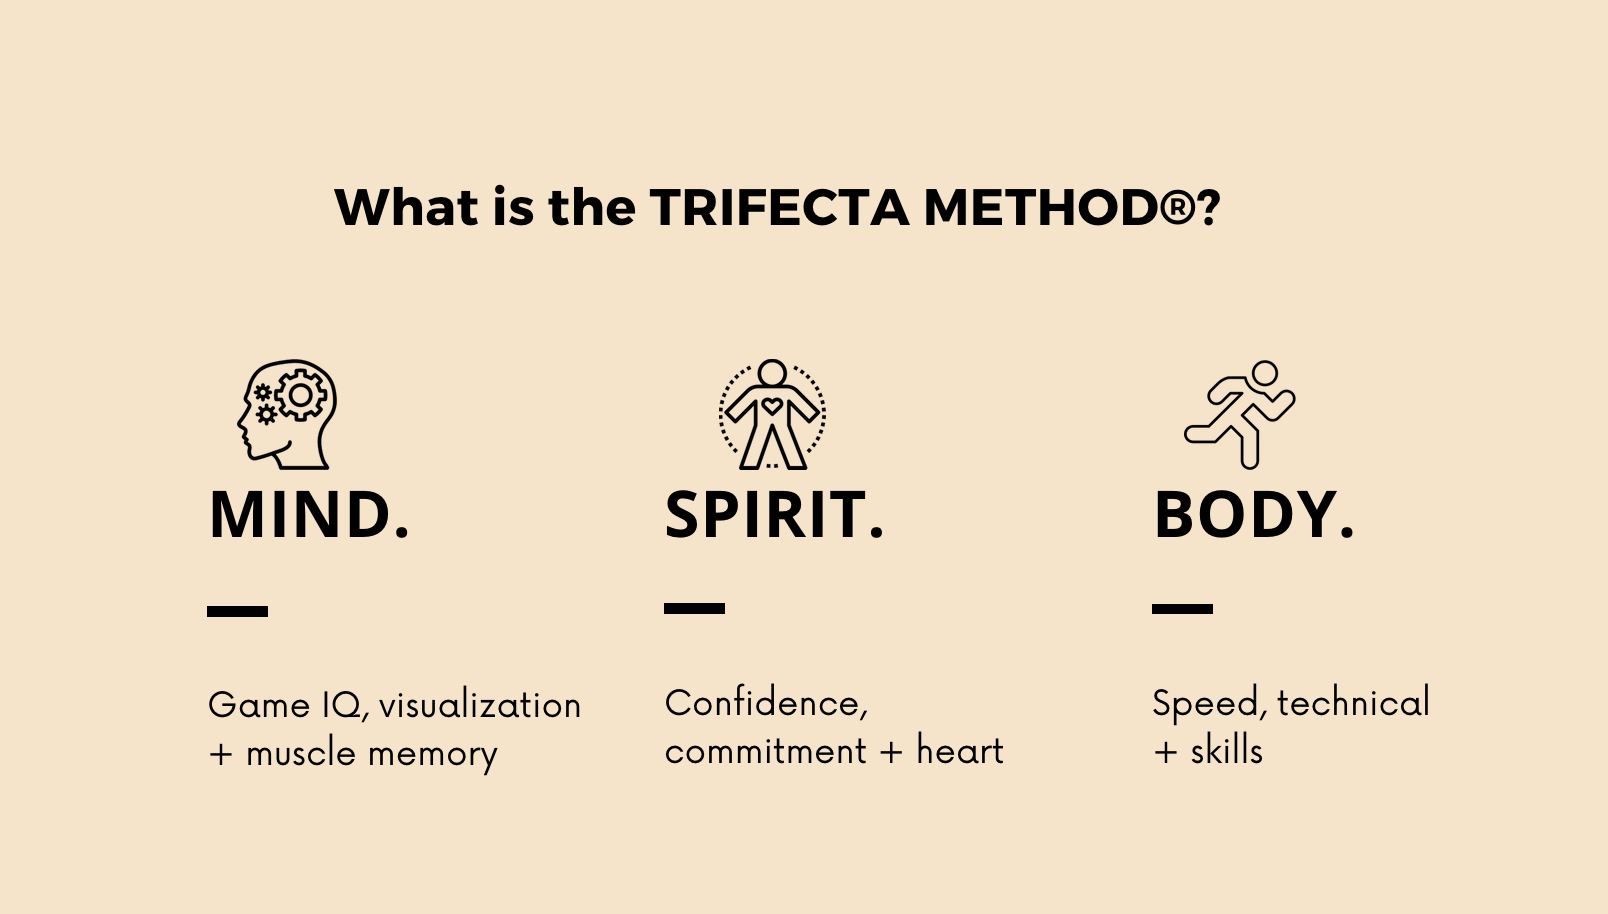 https://cdn.shopify.com/s/files/1/0564/3665/4233/files/What_is_the_Trifecta_Method.png?v=1628187455